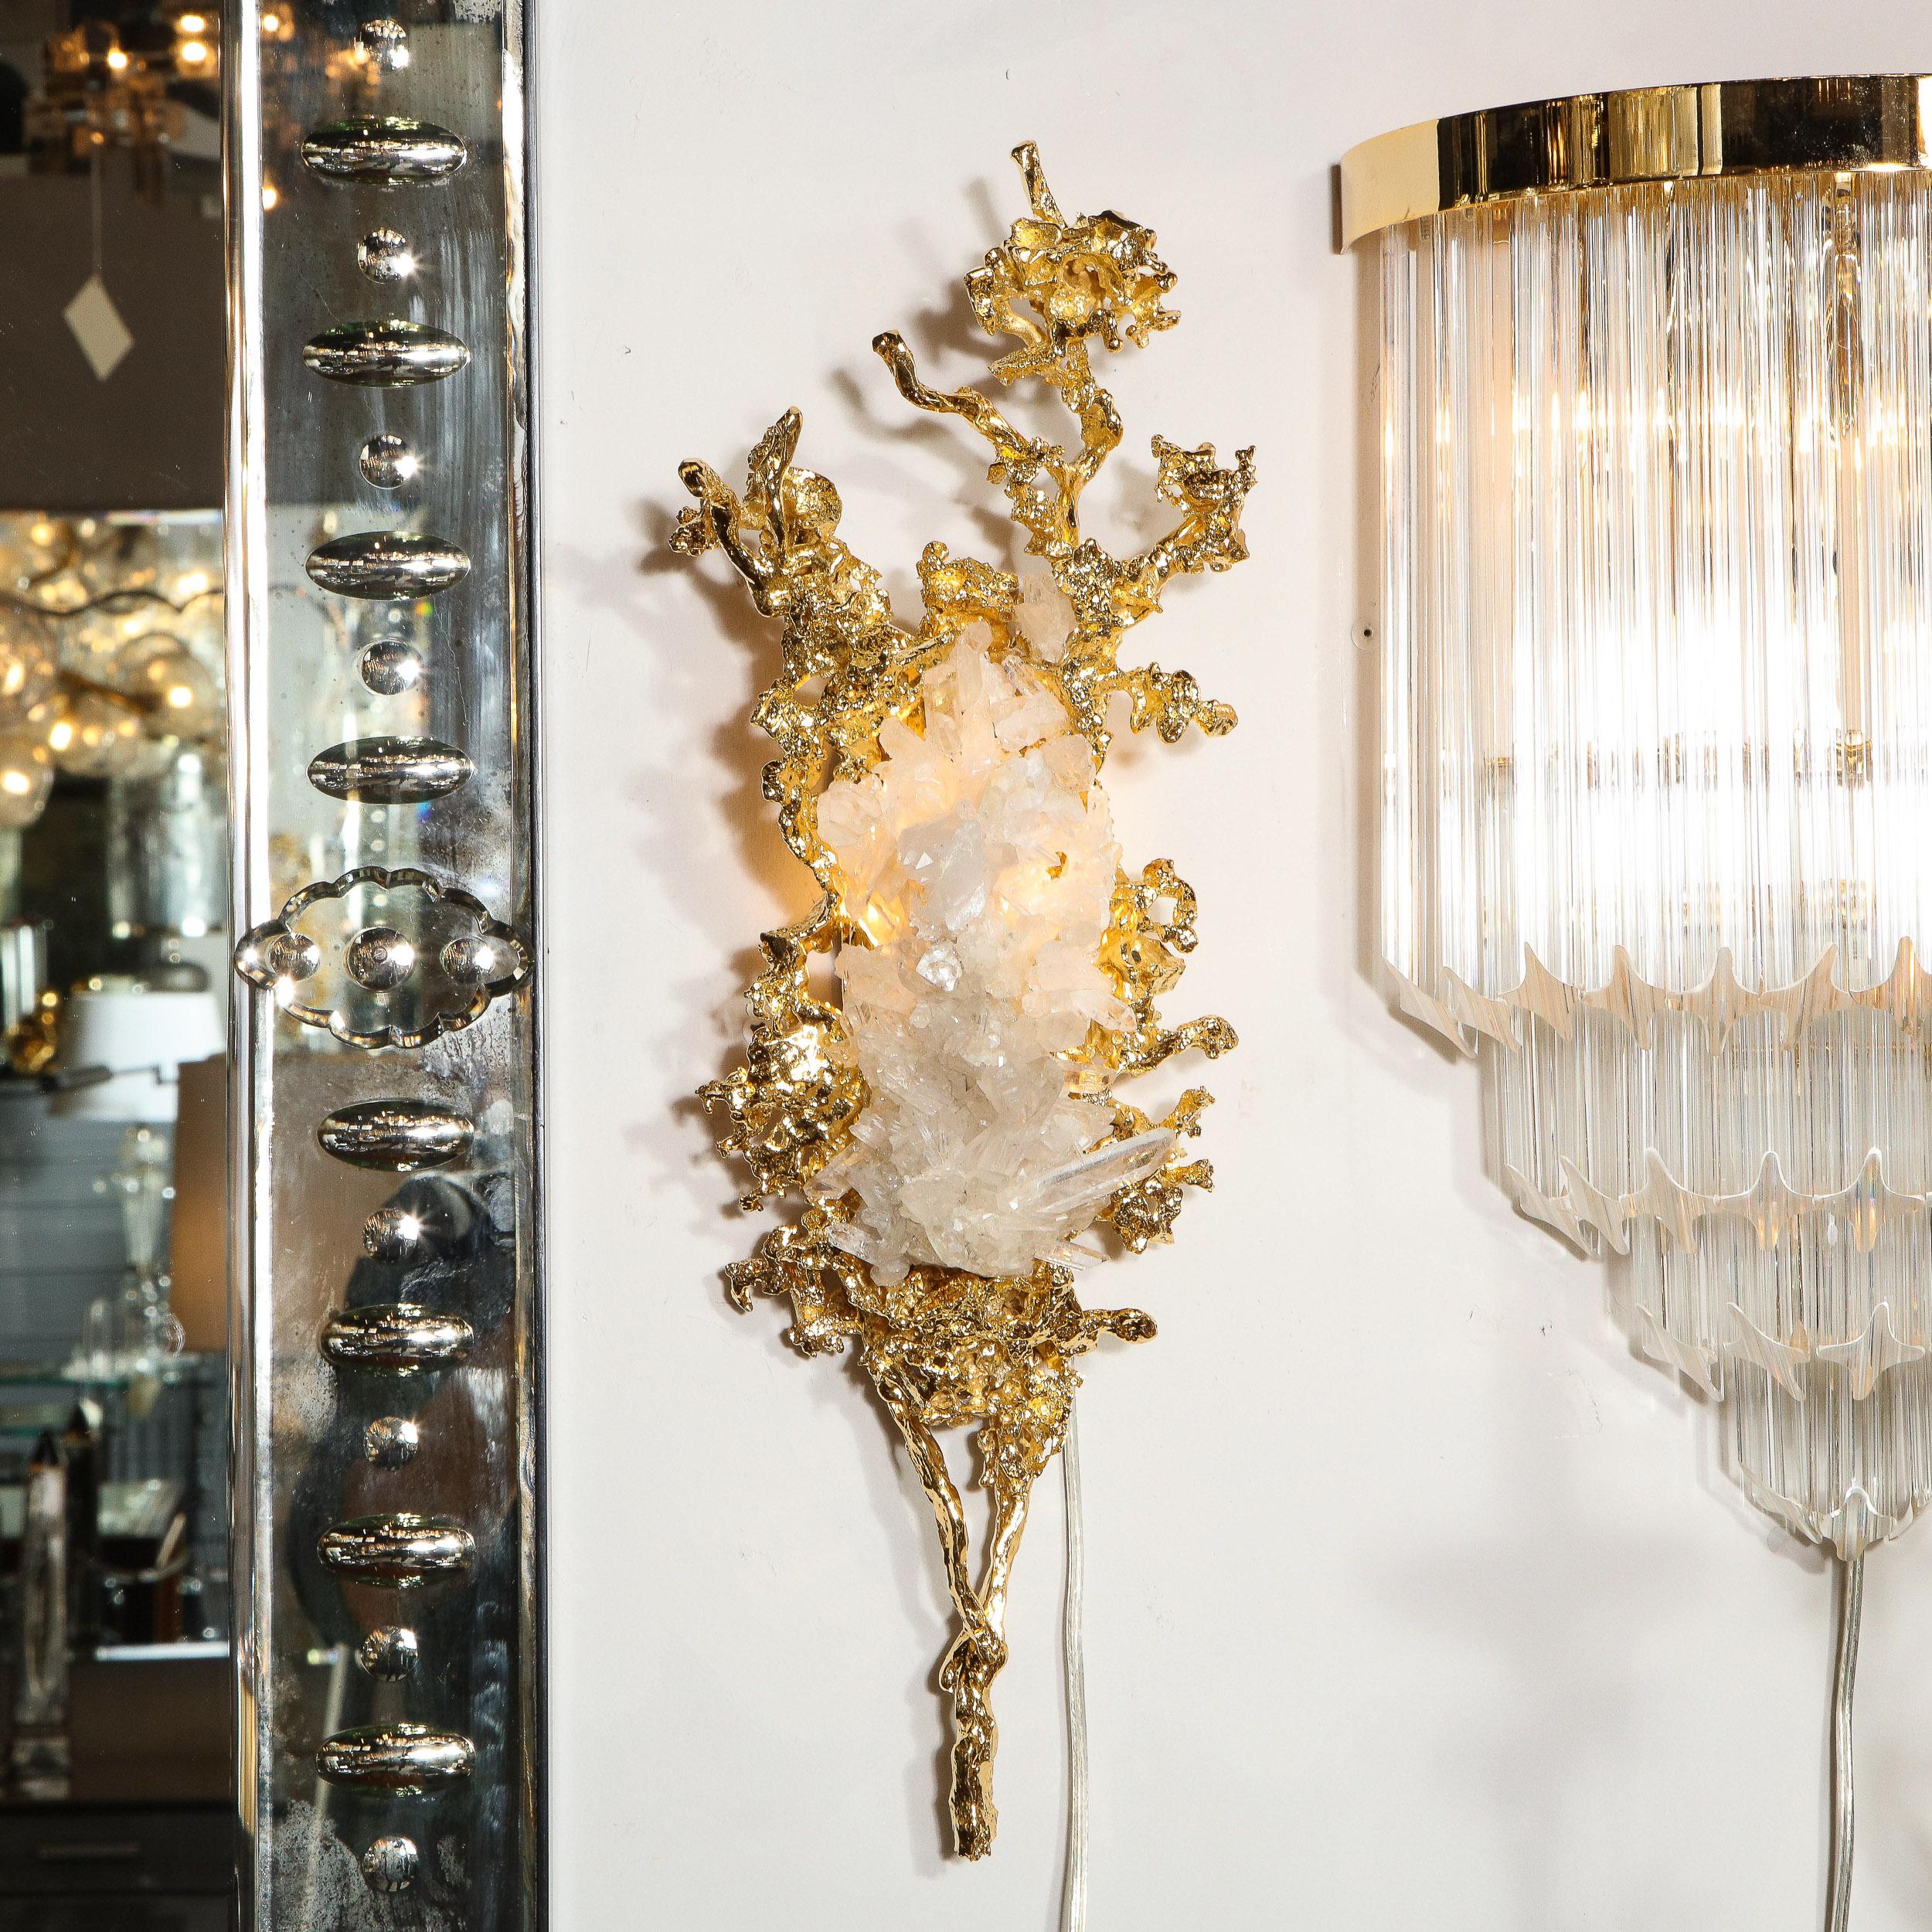 French Pair of Claude Boeltz 24kt Gold-Plated Exploded Bronze Sconces w/ Rock Crystals